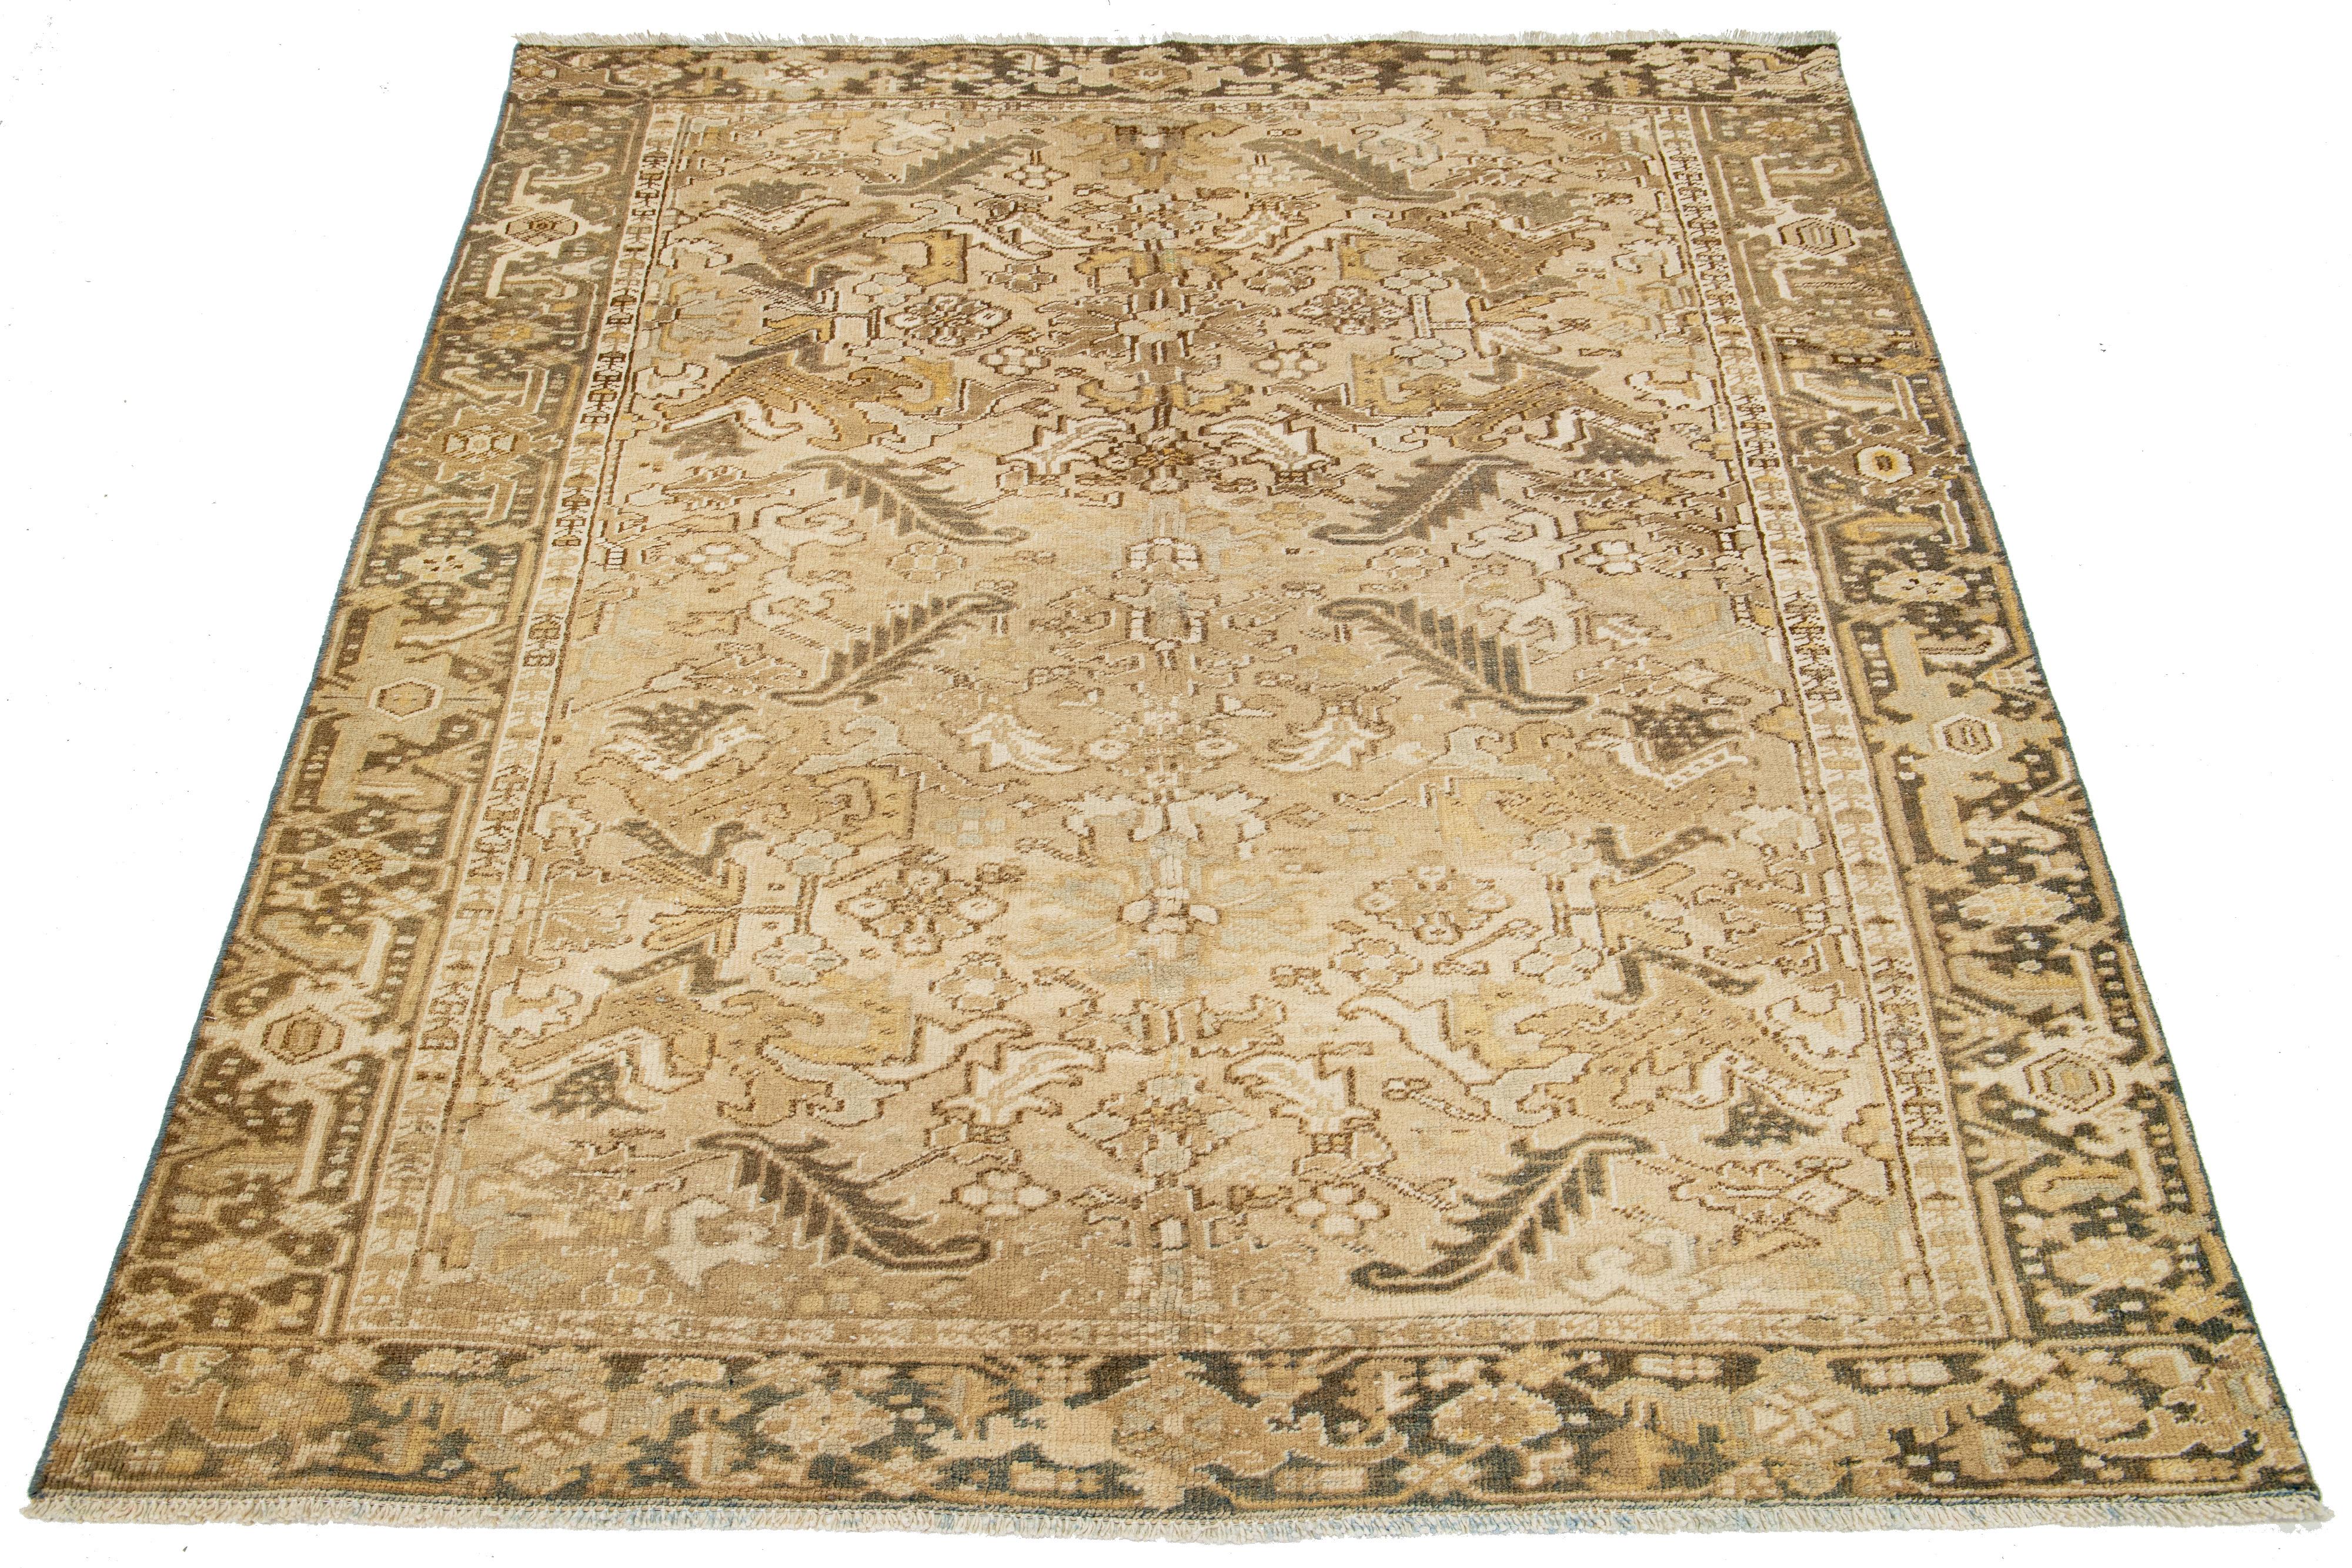 An antique Heriz rug from Persia is hand-knotted using wool. It features a beige field with a blue and brown all-over pattern.

This rug measures 6'4' x 7'10